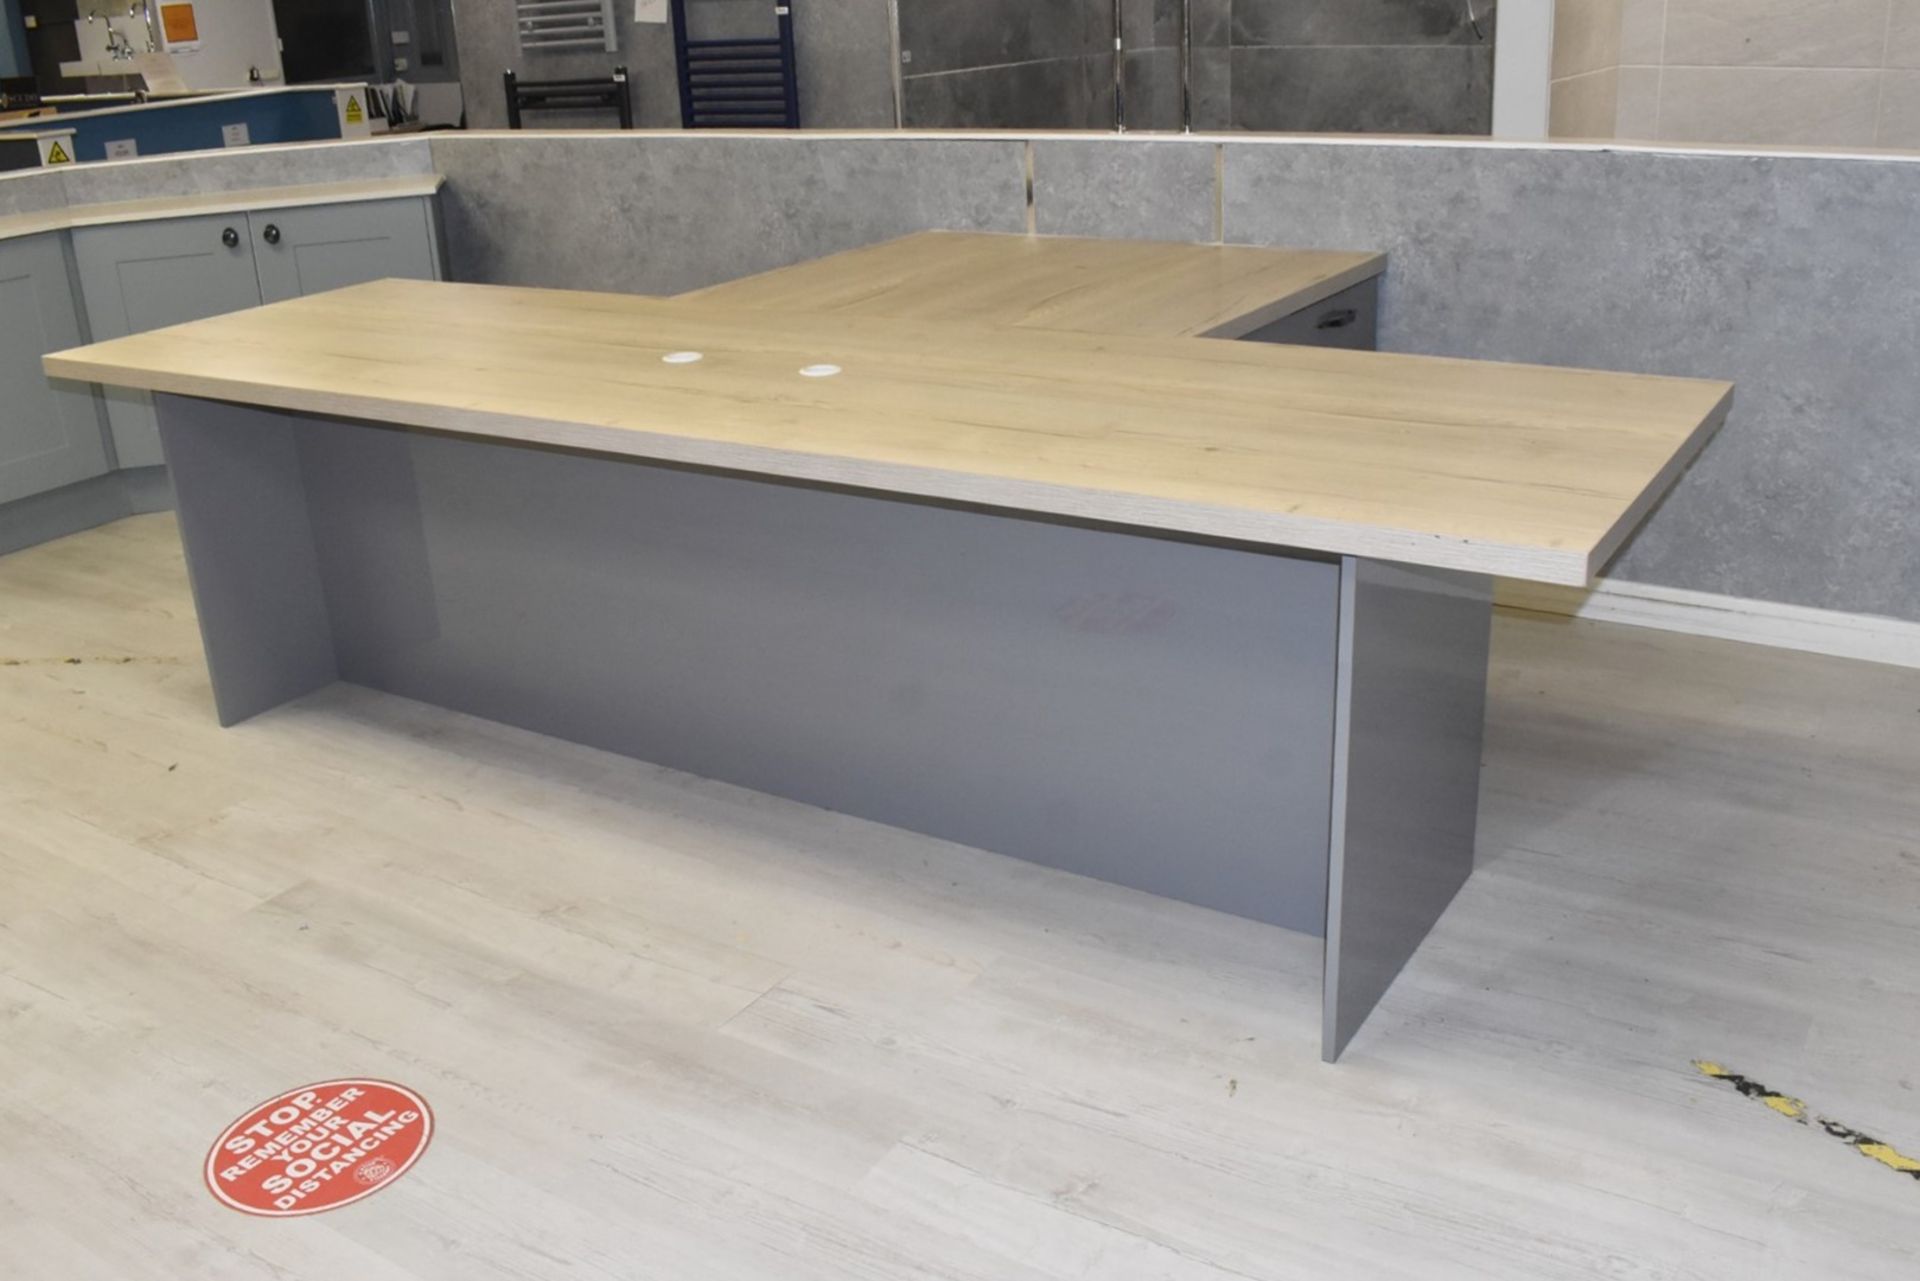 1 x Multi-User Office Desk For Staff / Clients With Cupboard and Drawer Space - Light Wood Finish - Image 2 of 16